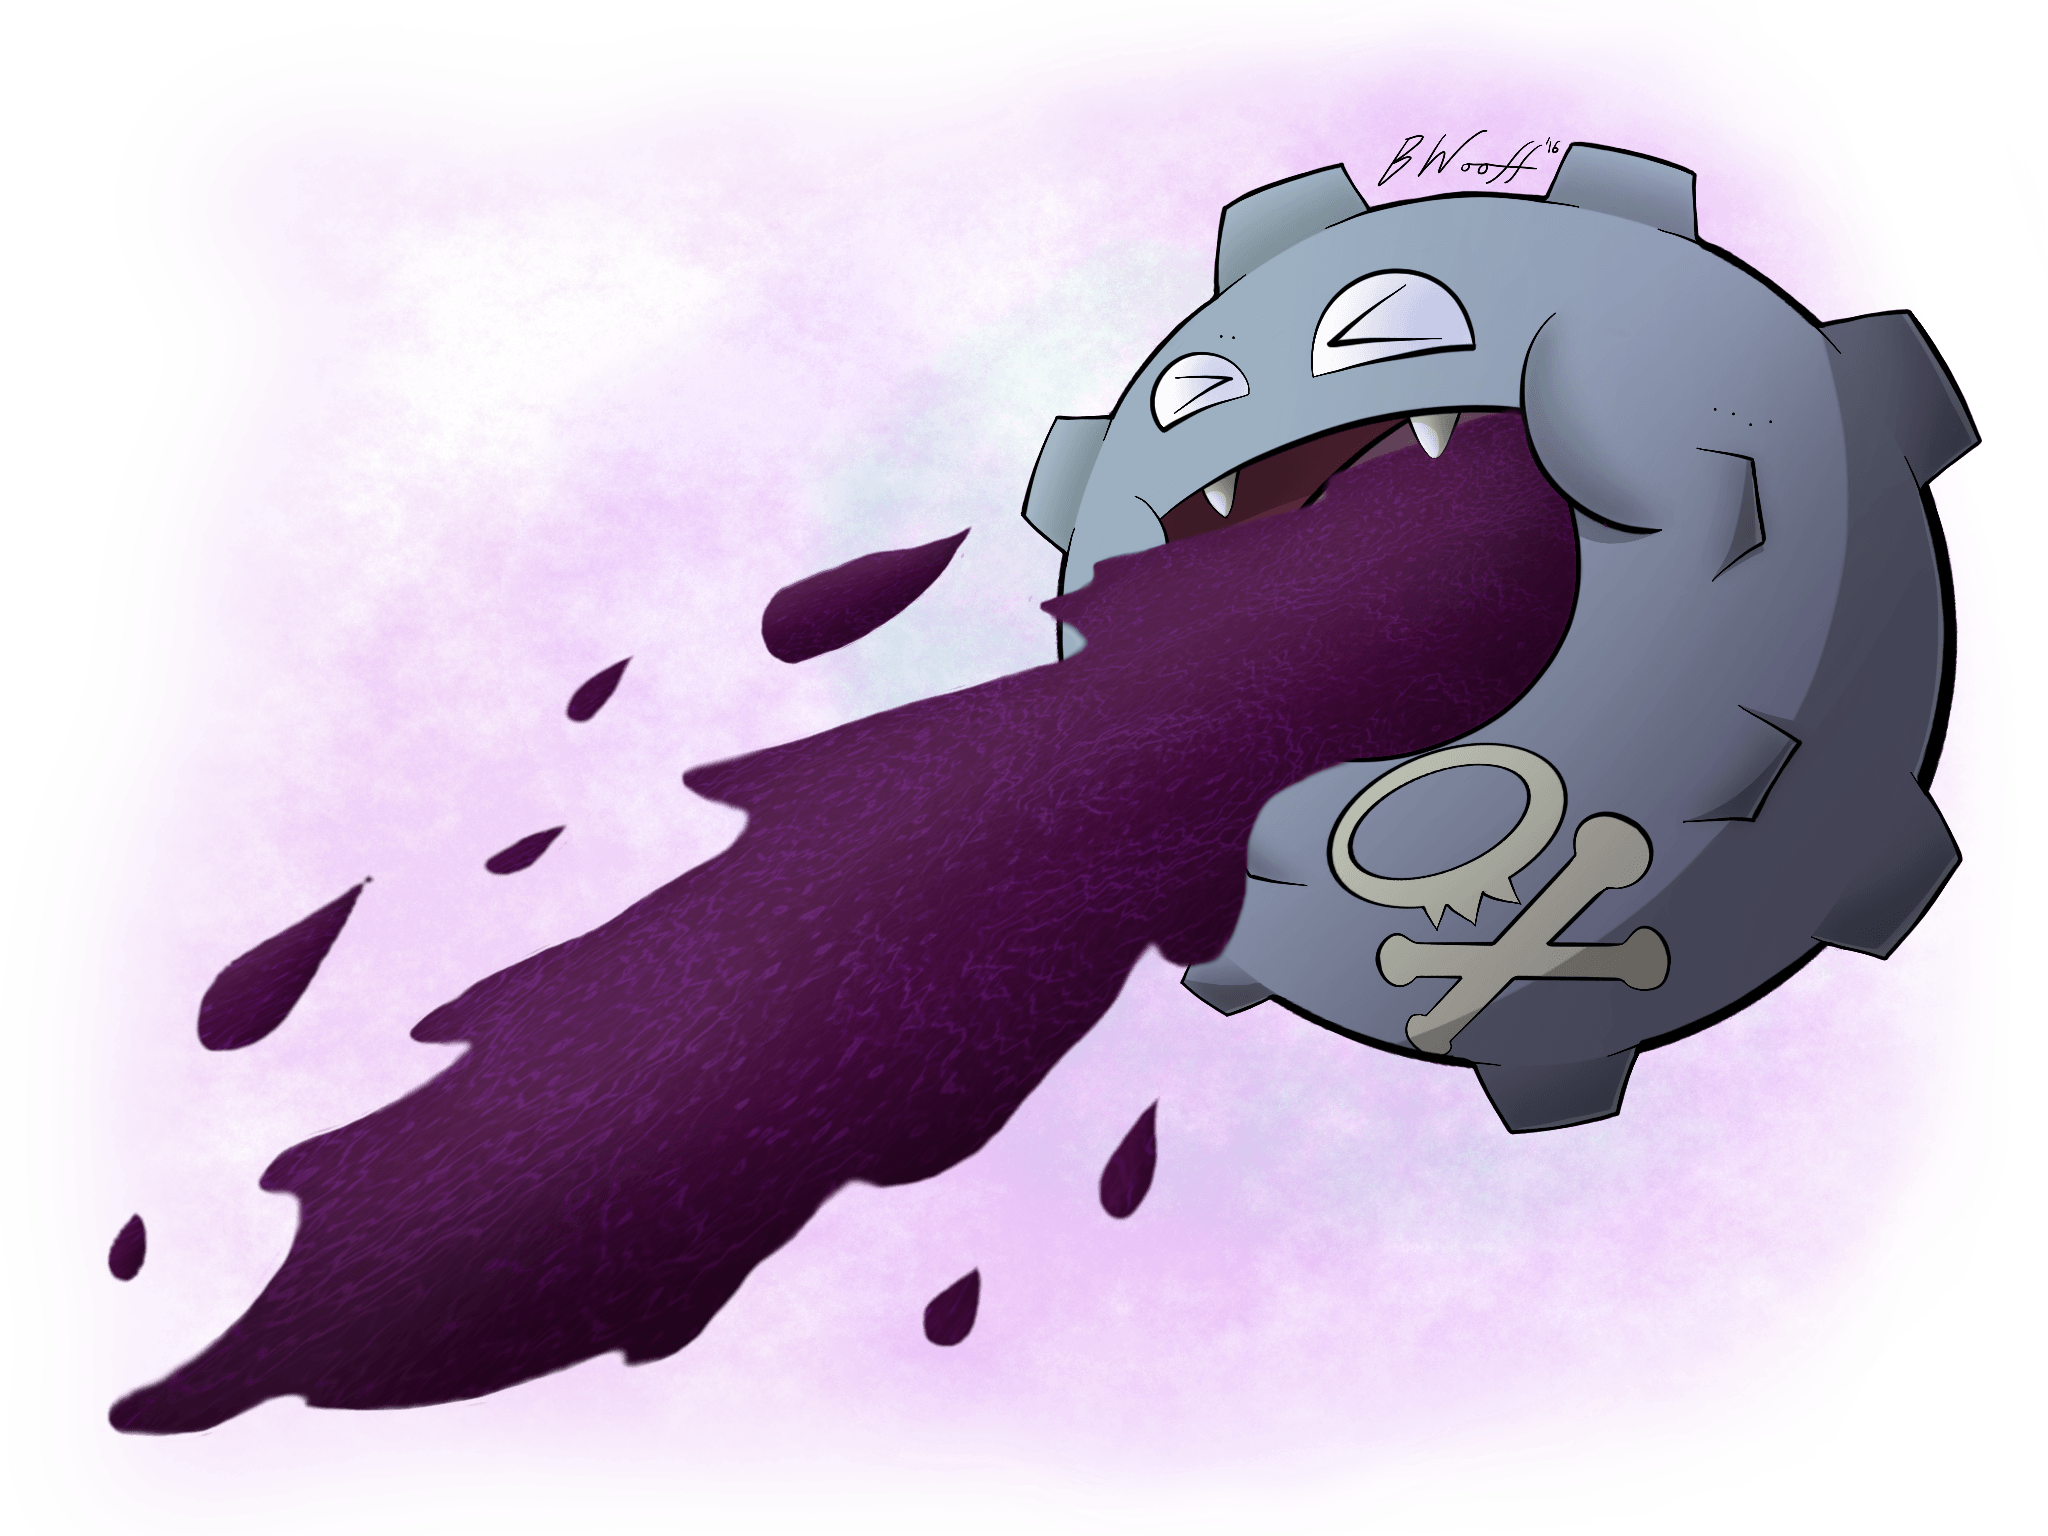 Koffing used Sludge and Poison Gas!